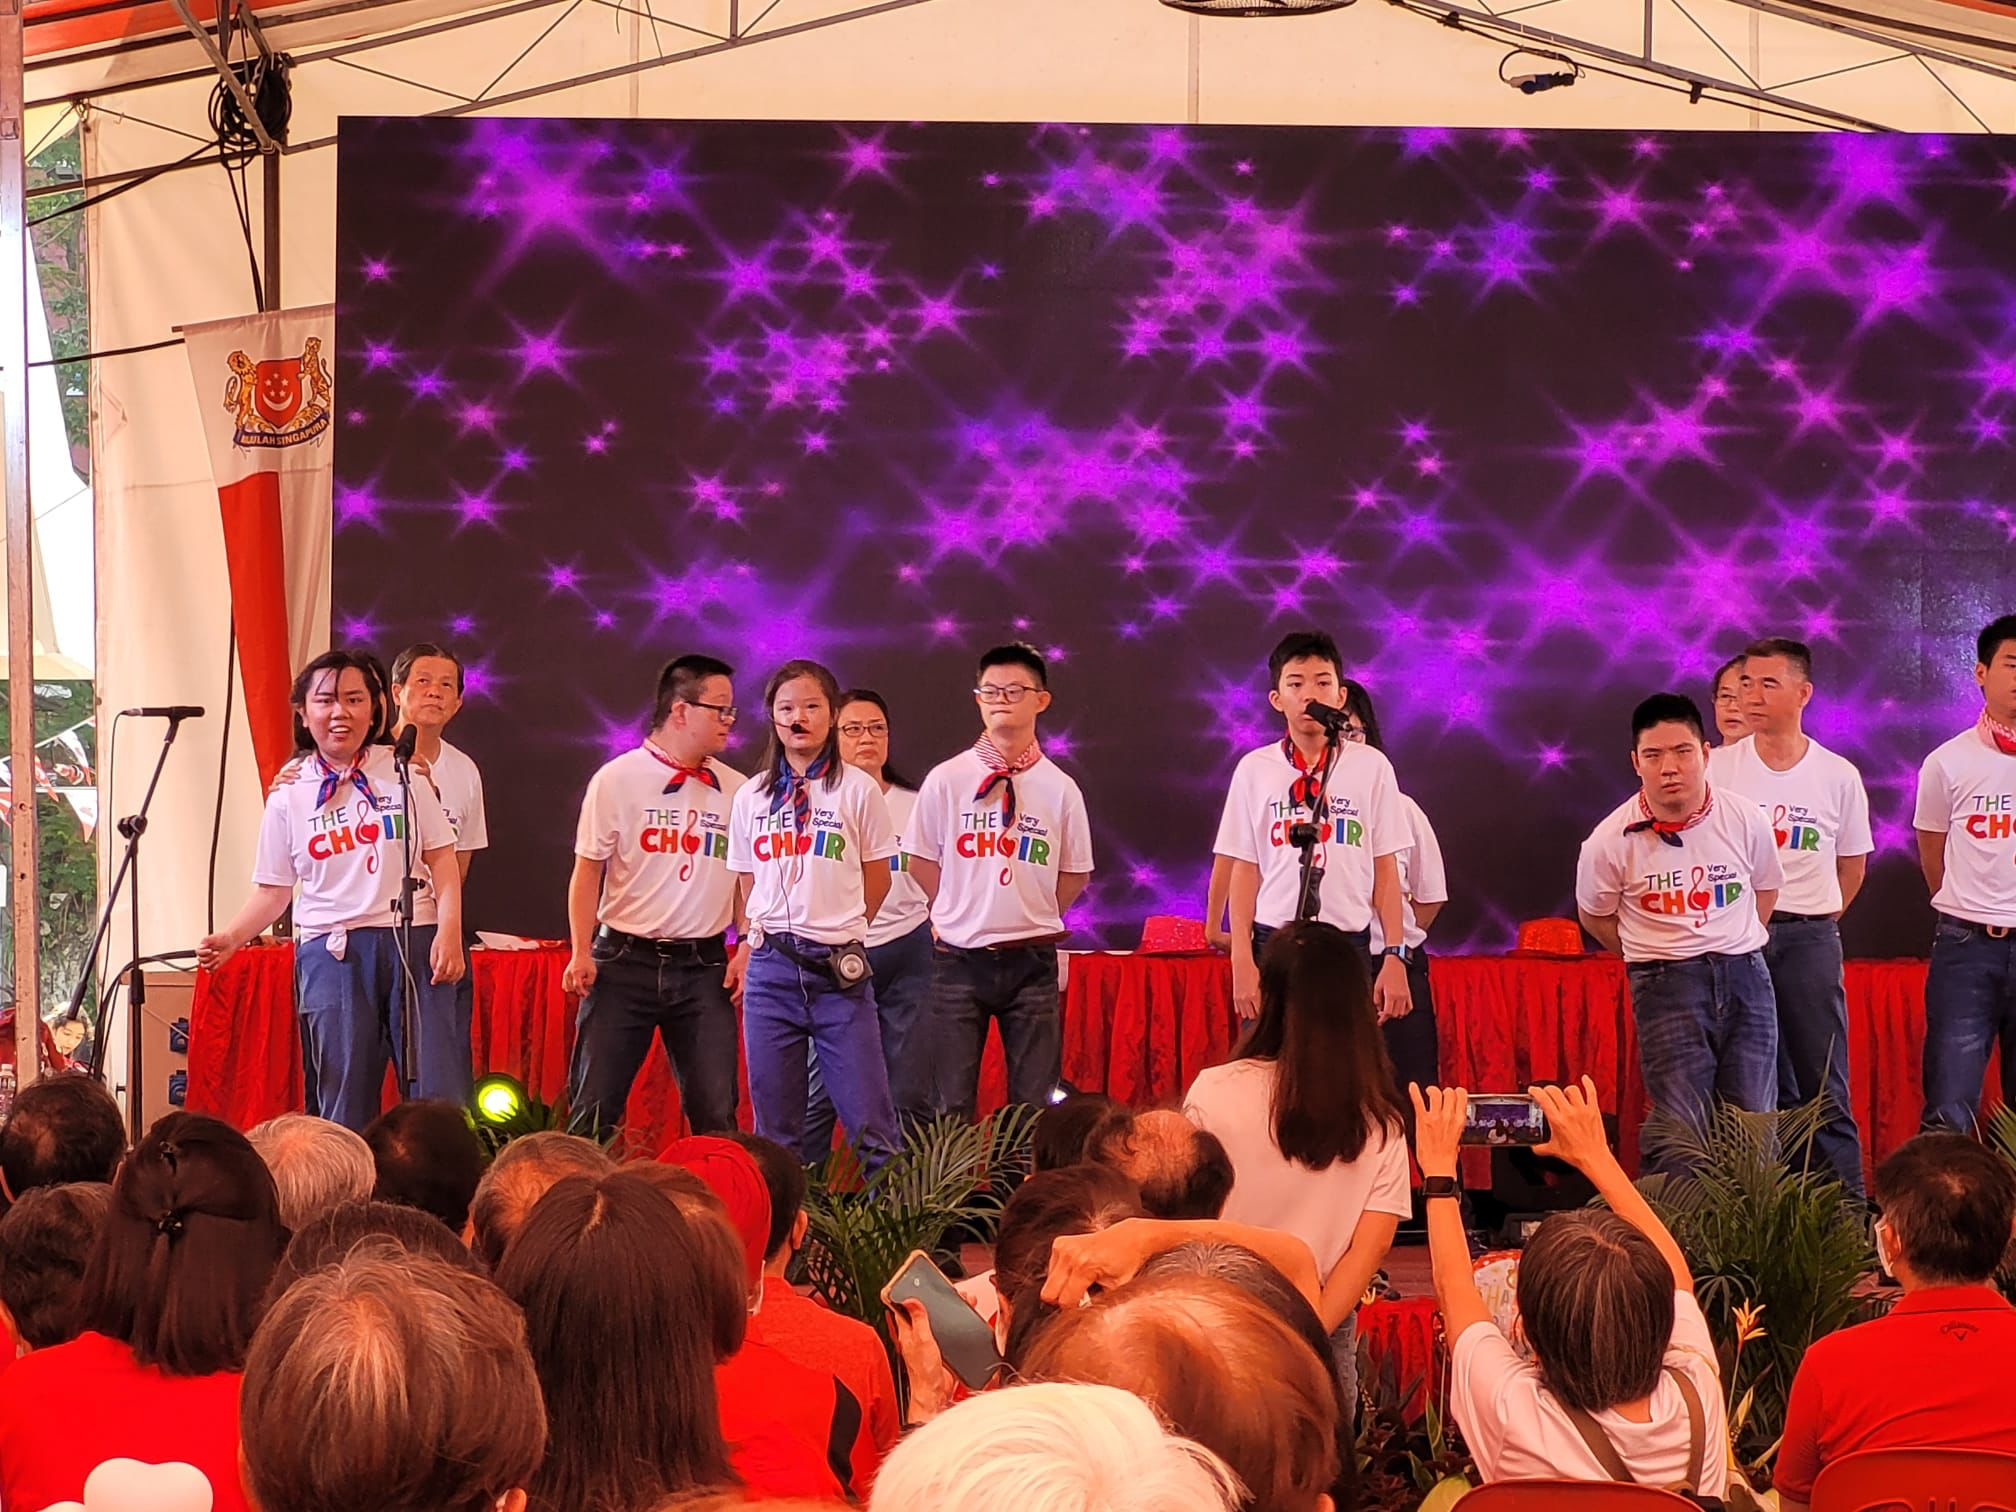 VSC members, which include children with disabilities, performed on stage